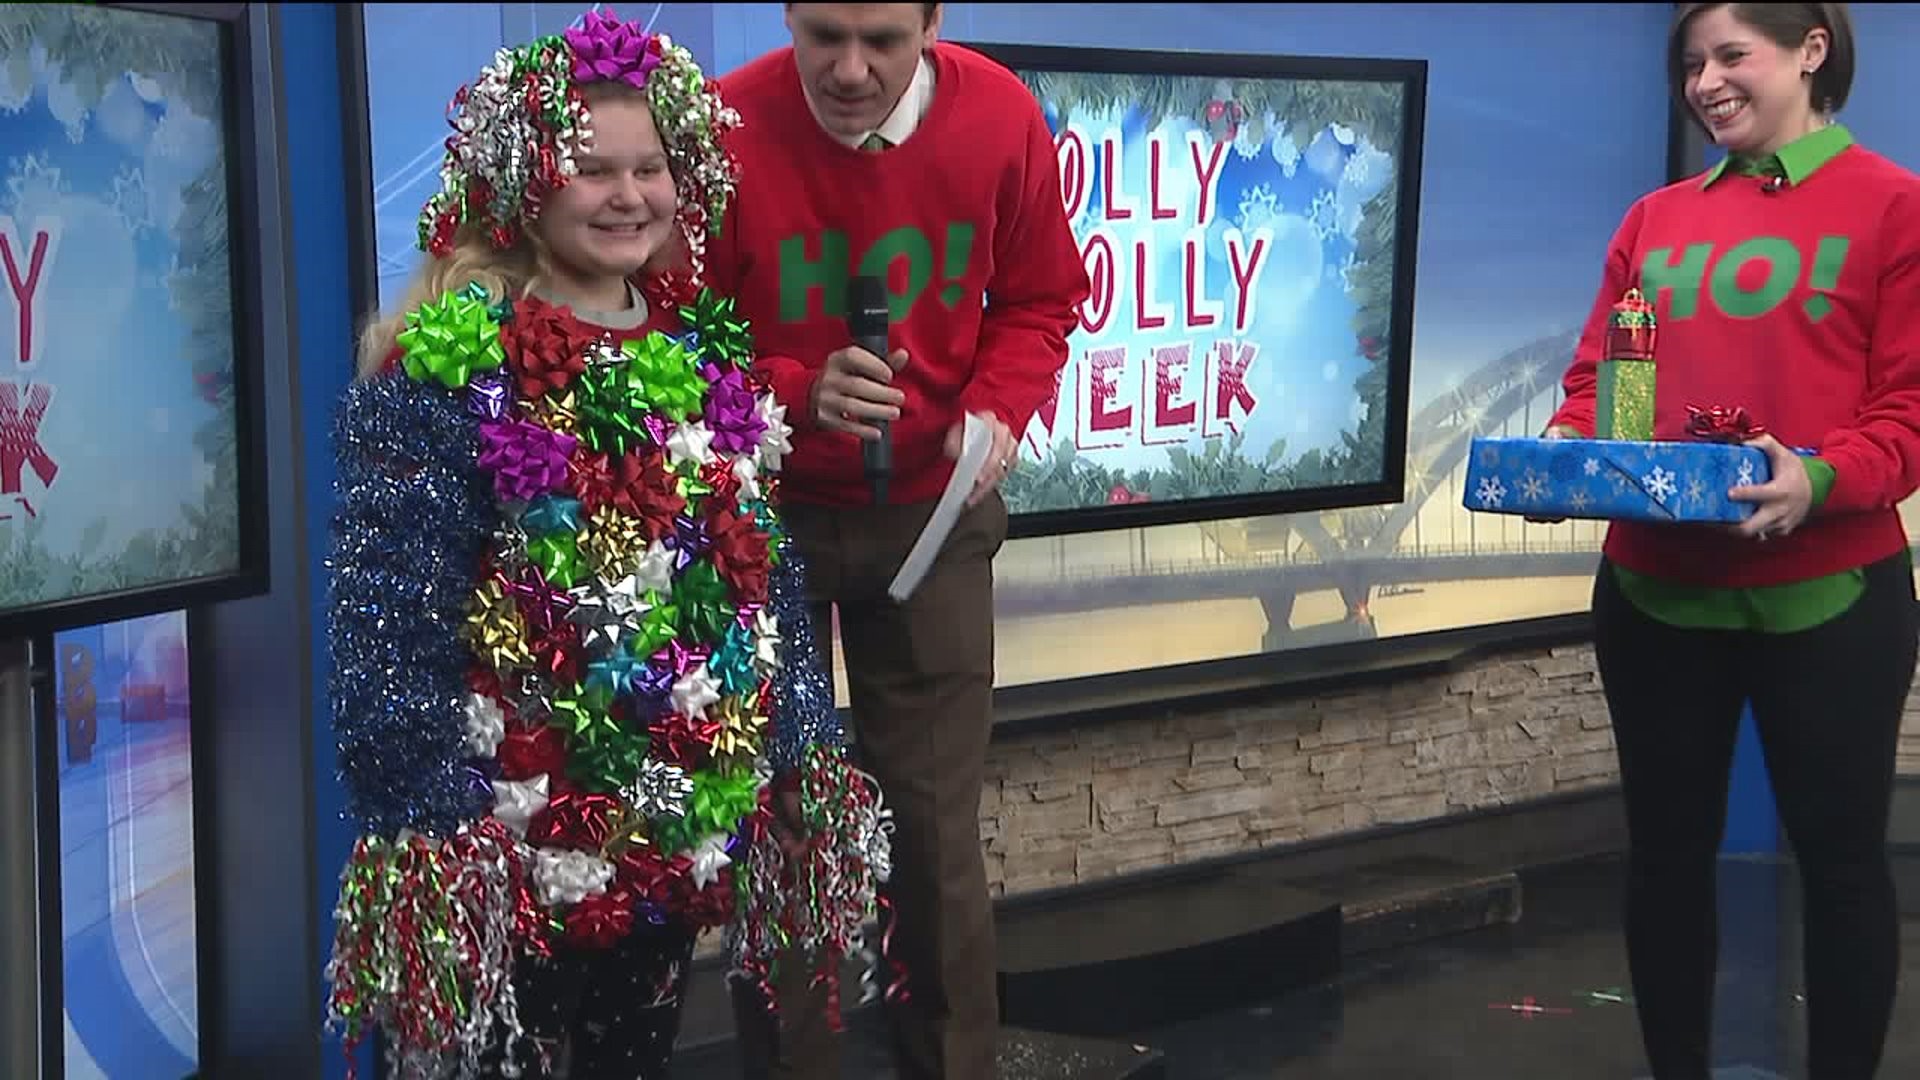 GMQC HOLLY JOLLY WEEK: Day 2 Features the "Ugliest" Christmas Sweaters in the Quad Cities